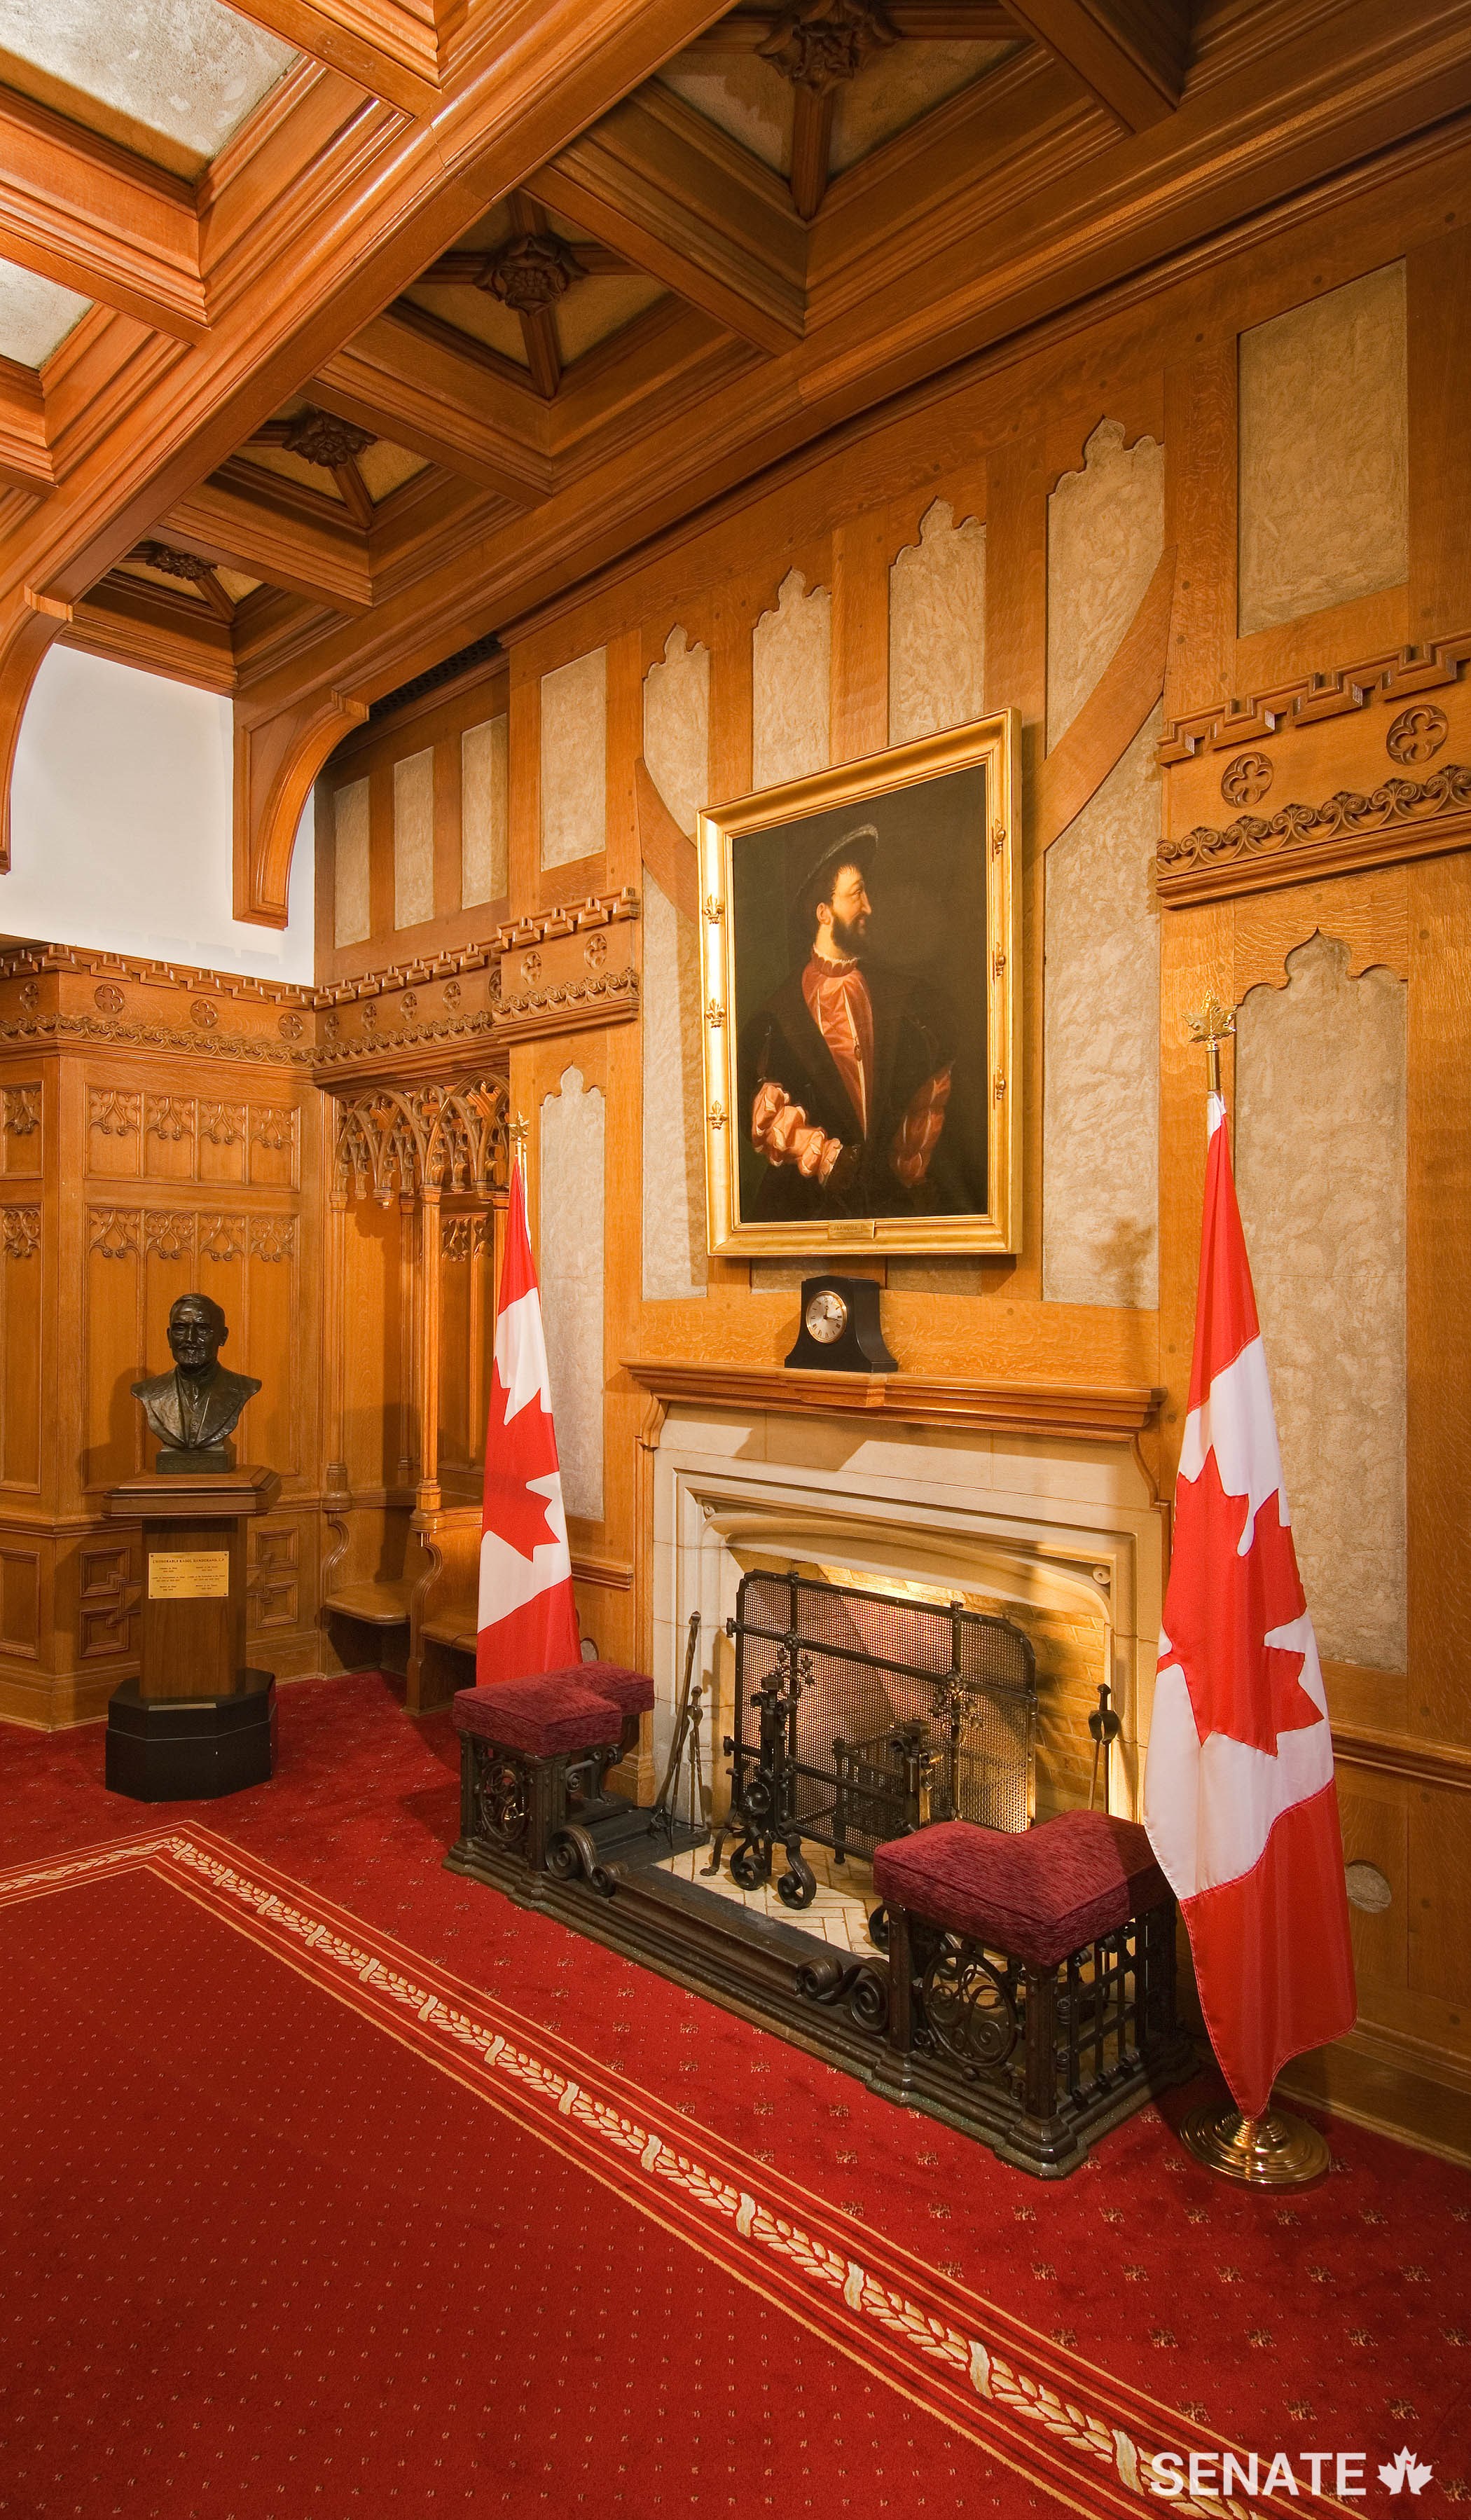 Works of art in the Salon de la Francophonie includes artwork depicting French kings, including the prominent display of a portrait of François I, who was king when explorer Jacques Cartier explored the St. Lawrence River in 1534.